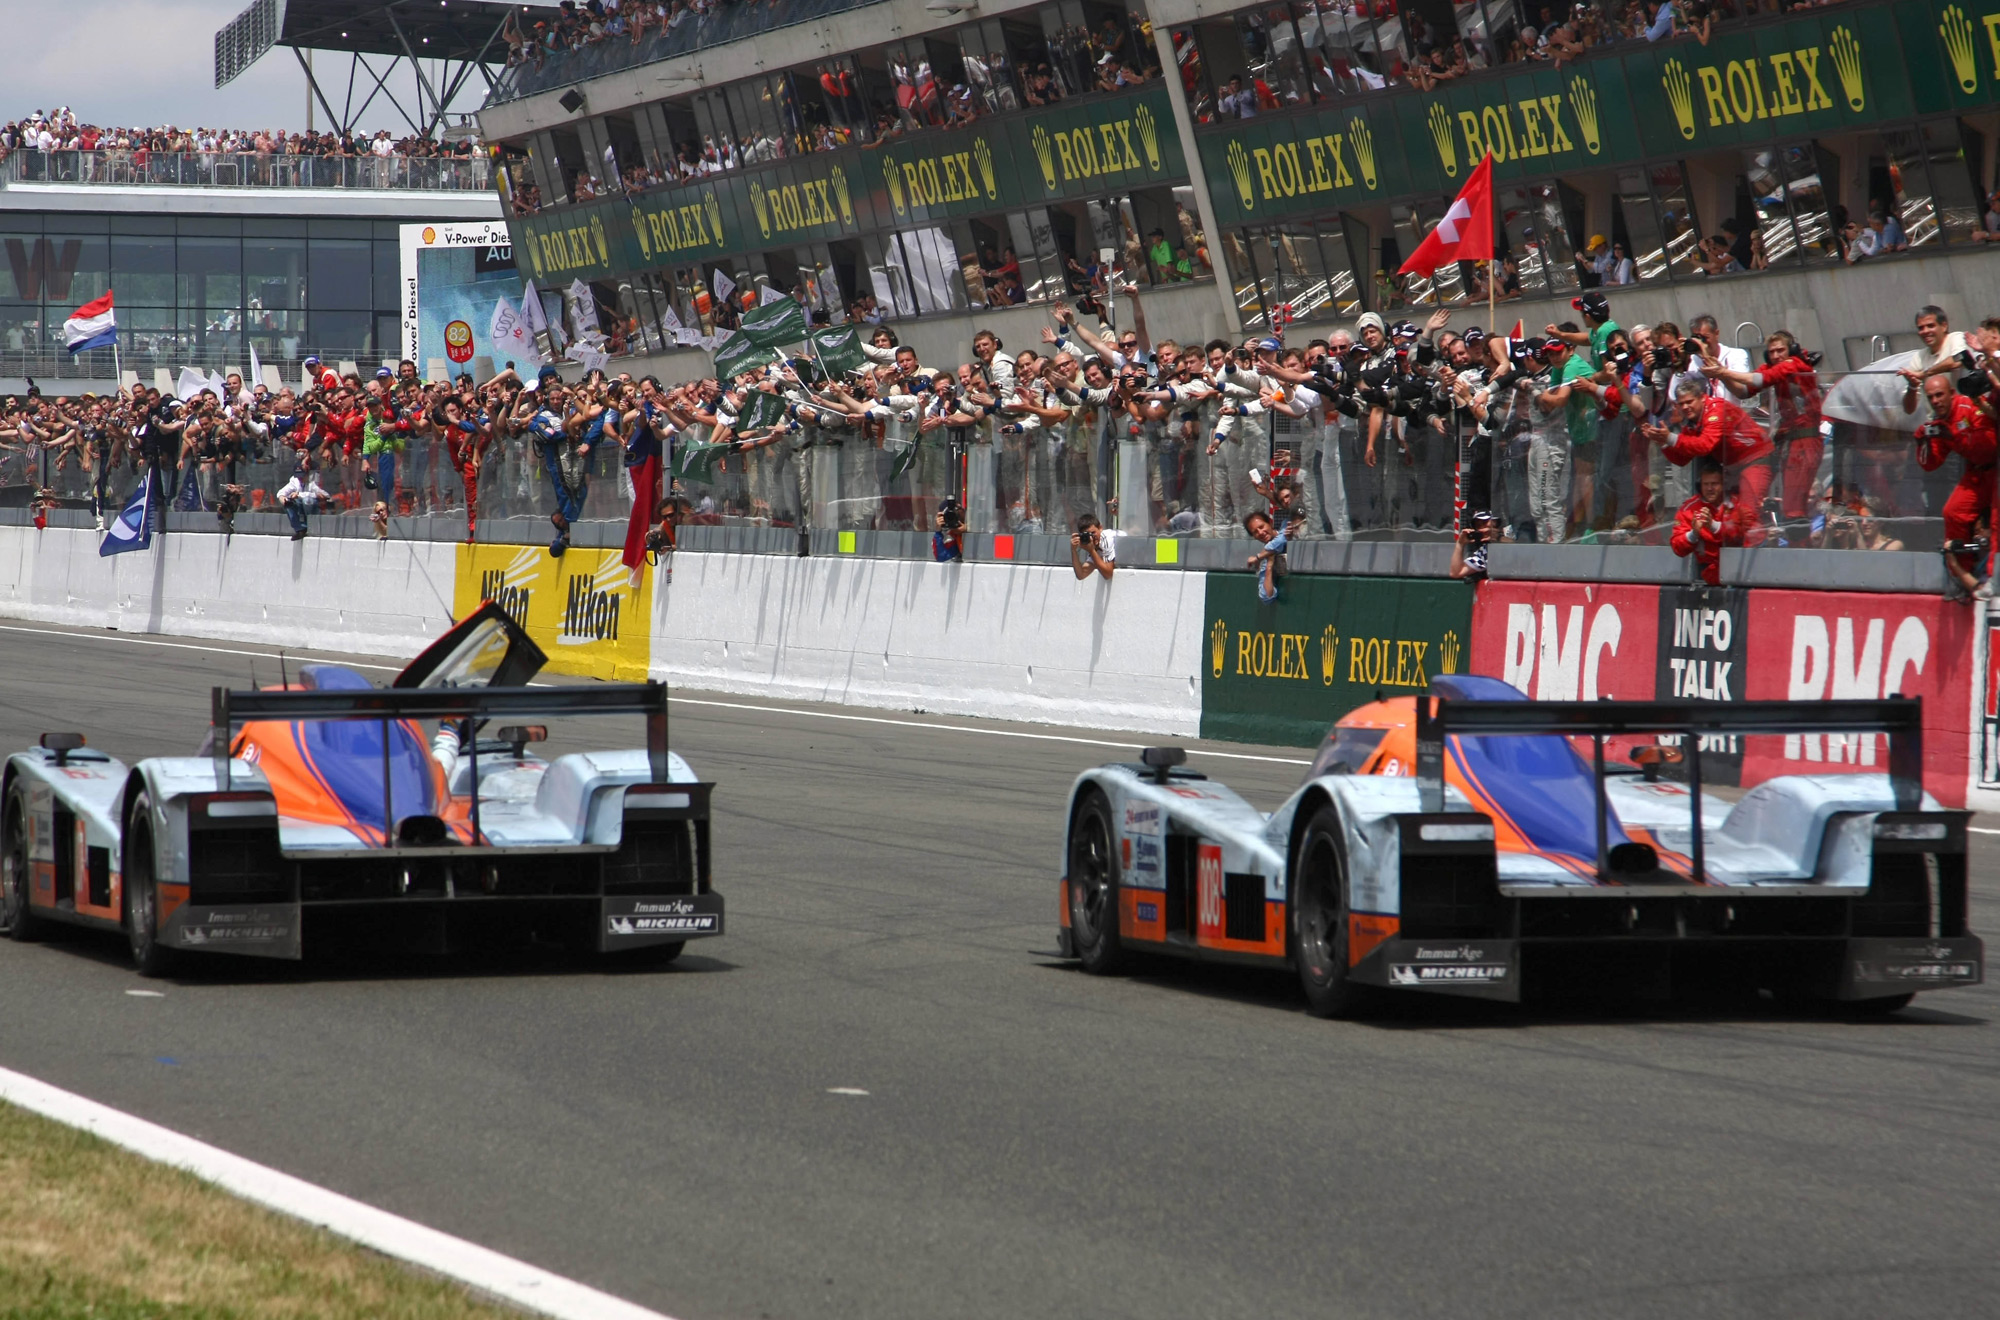 The 24 hours of Le Mans turned